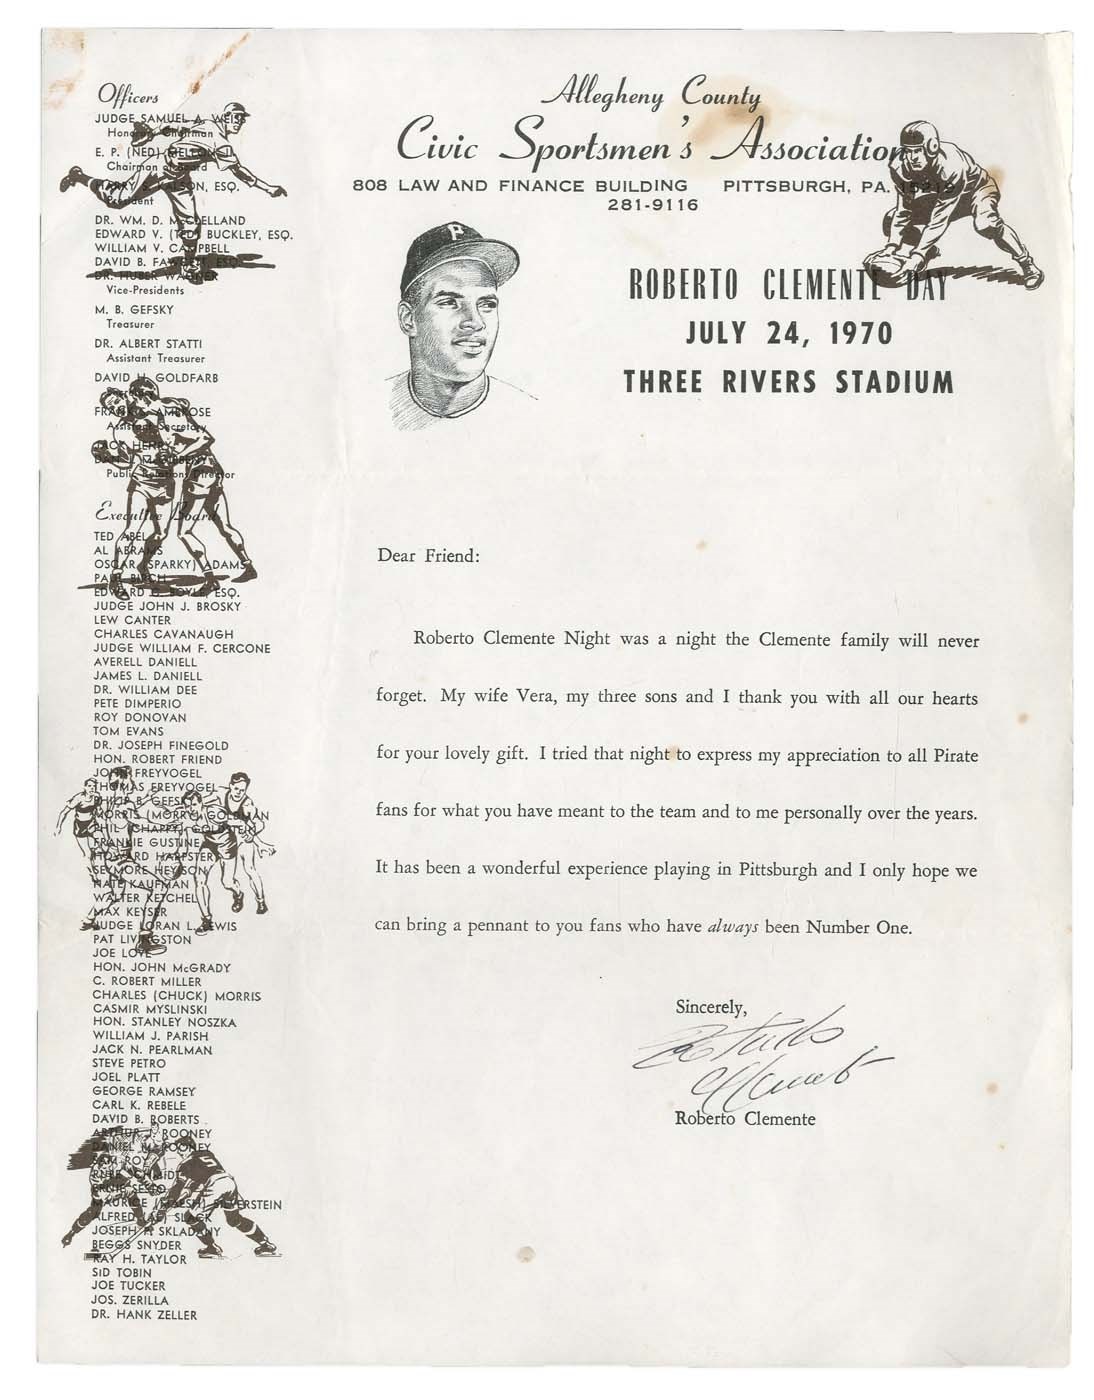 Clemente and Pittsburgh Pirates - 1970 Roberto Clemente Day Signed Letter (PSA)